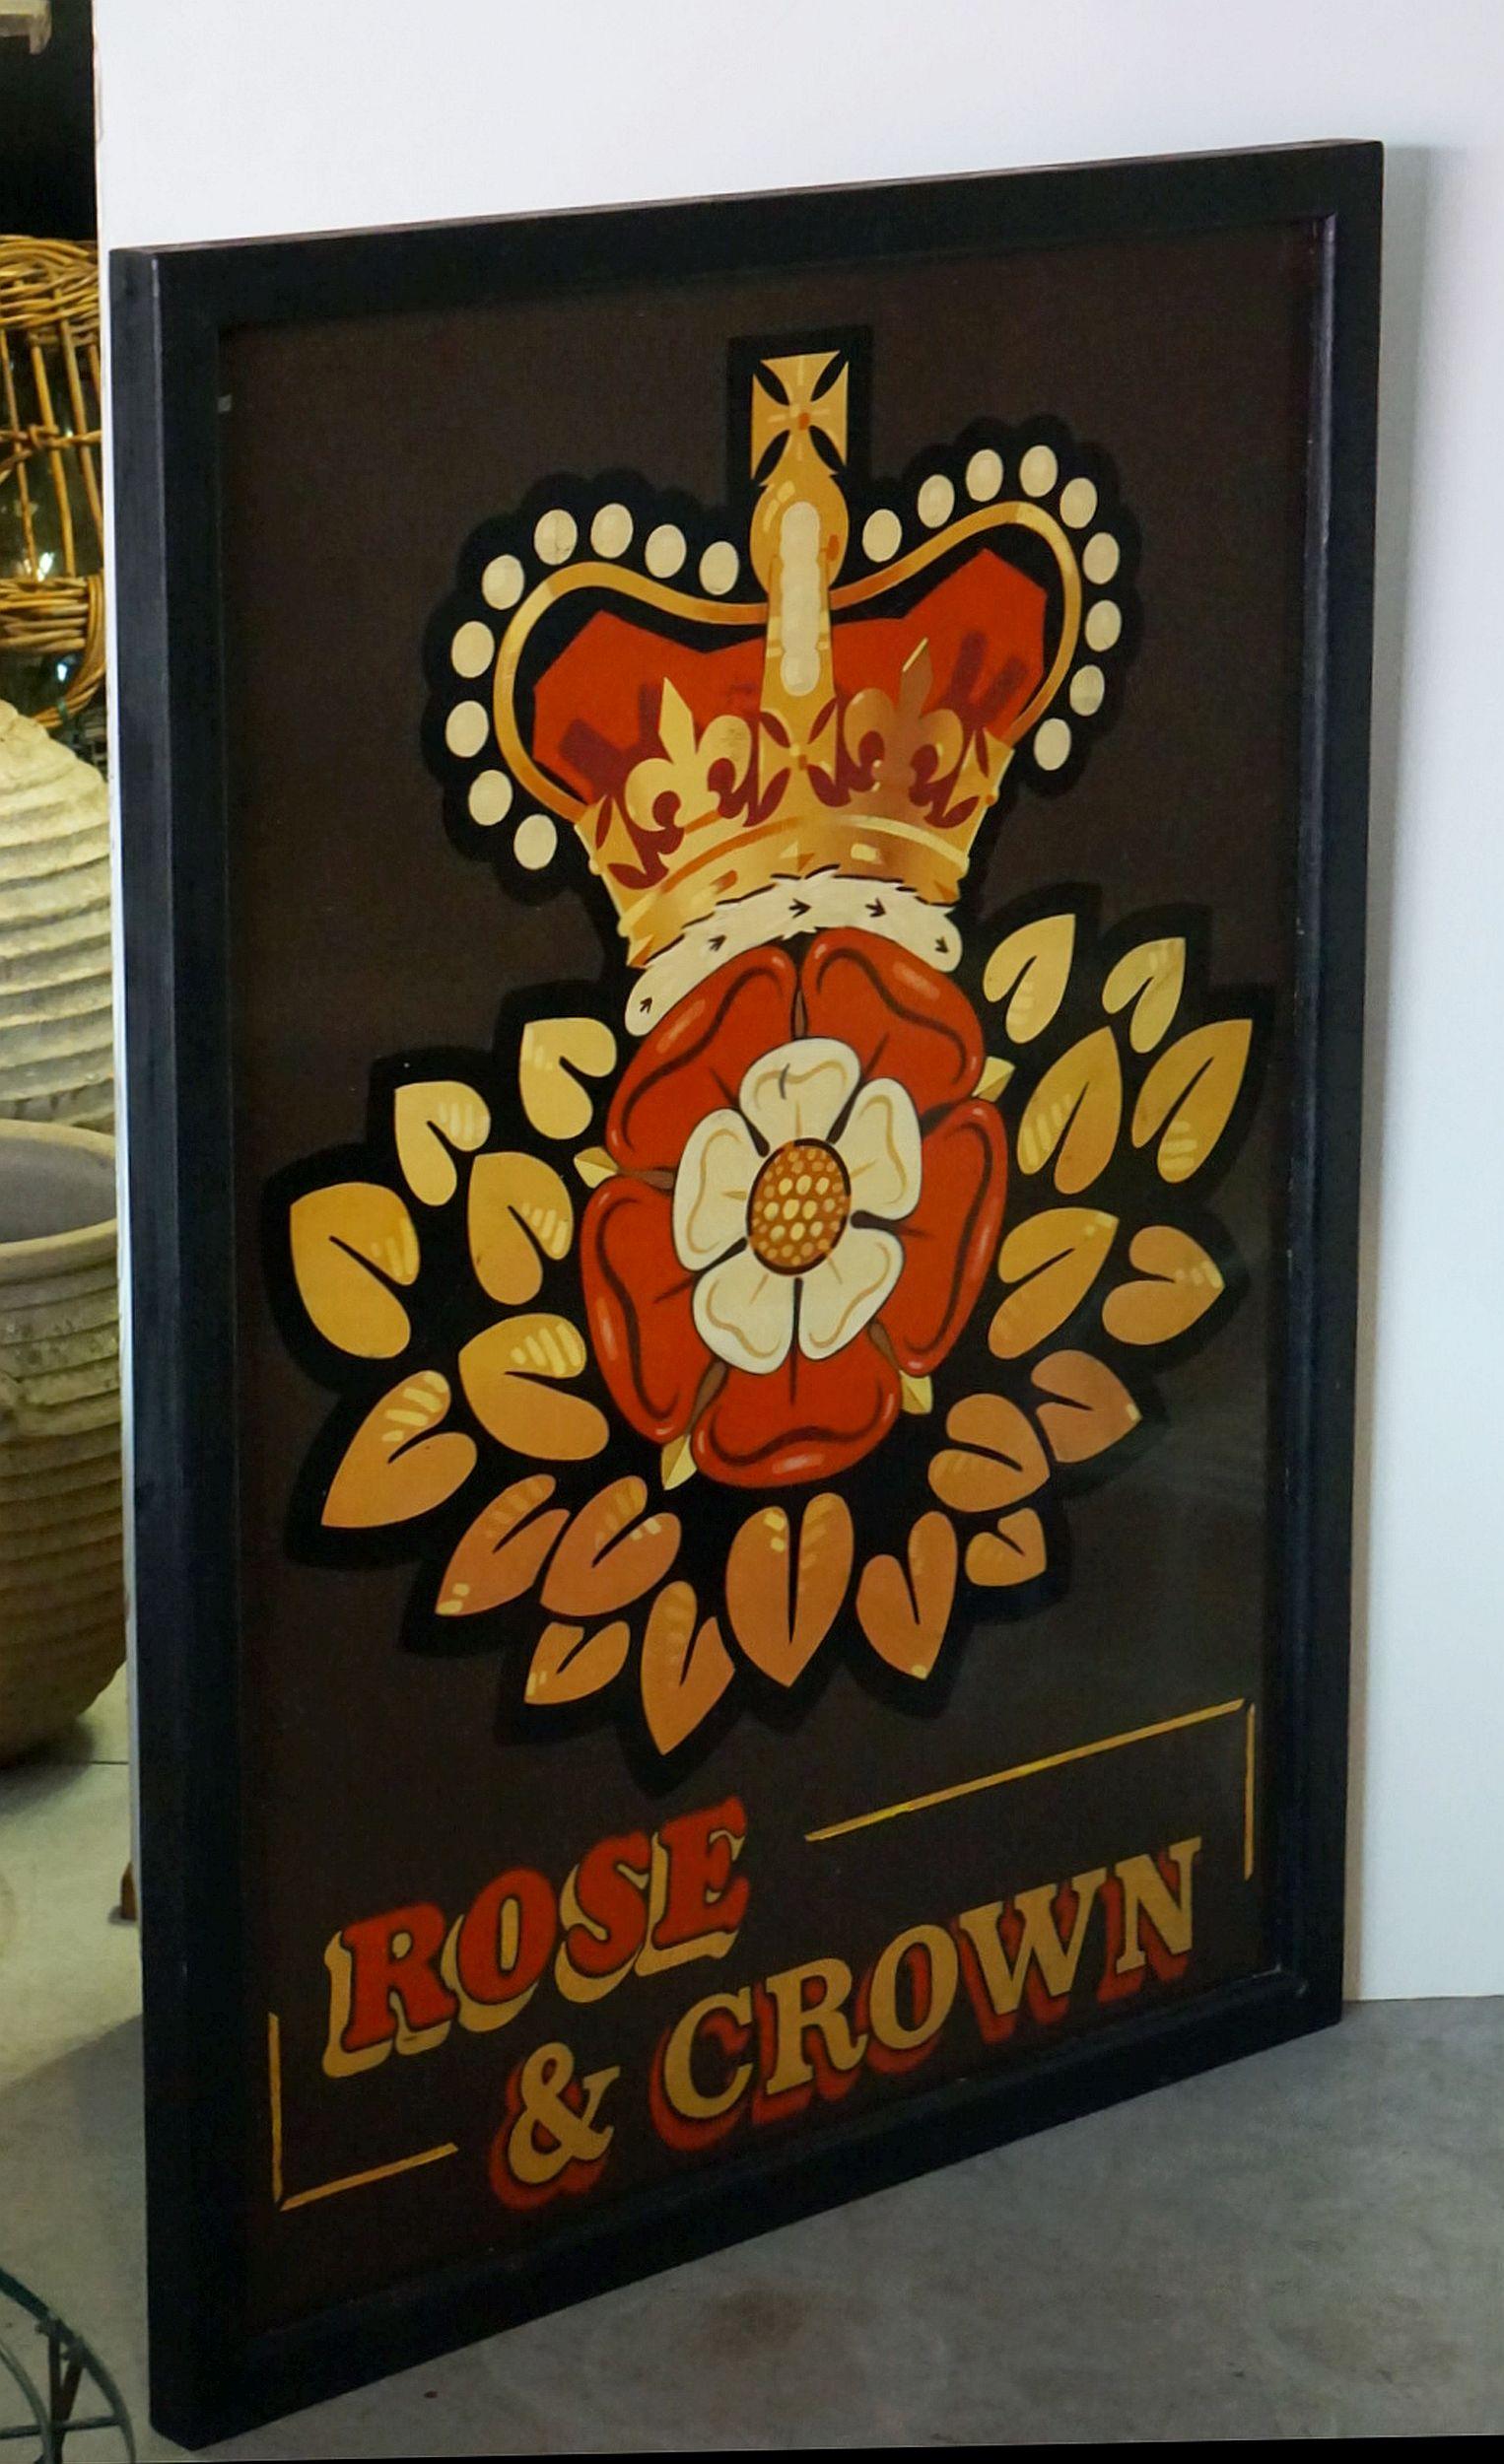 An authentic English pub sign (two-sided) featuring a painting of the British crown over a Tudor Rose, entitled: Rose and Crown.

Rose and Crown: Edward III used a golden rose as a personal badge, and two of his sons adapted it by changing the